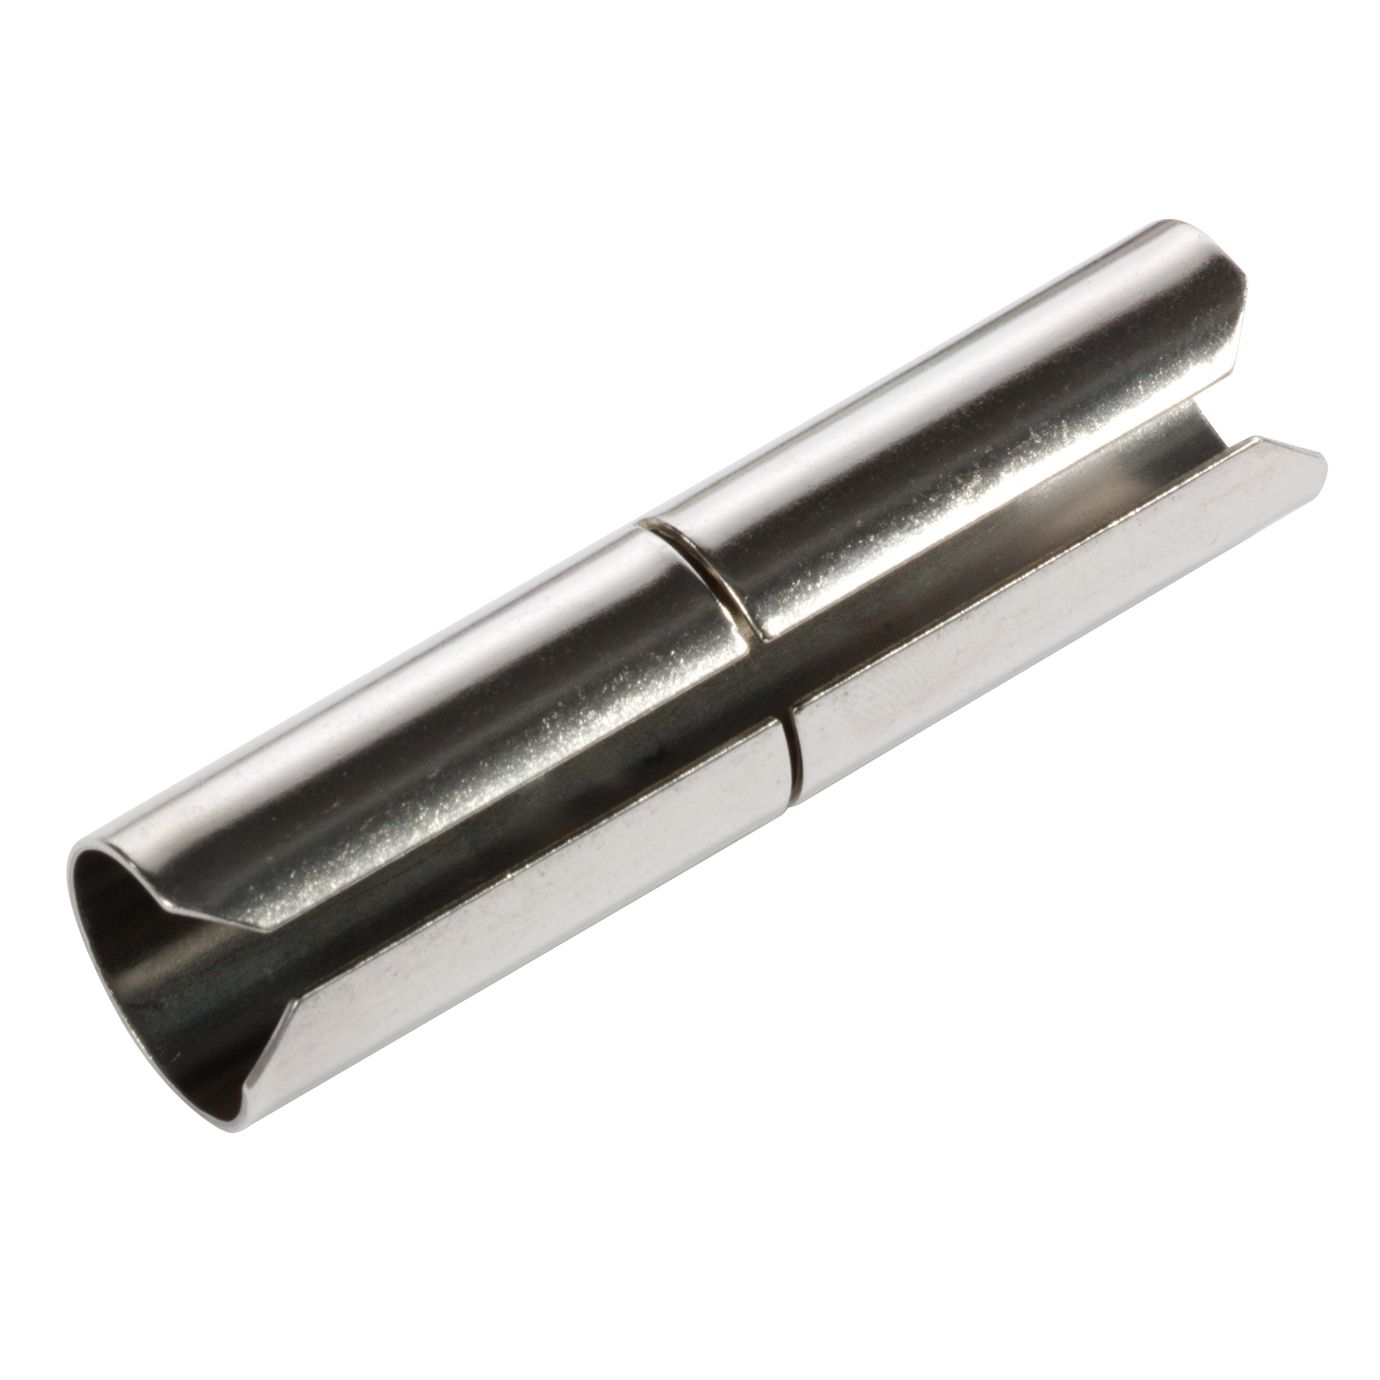 John Lewis Stainless Steel Pole Connector, 25mm